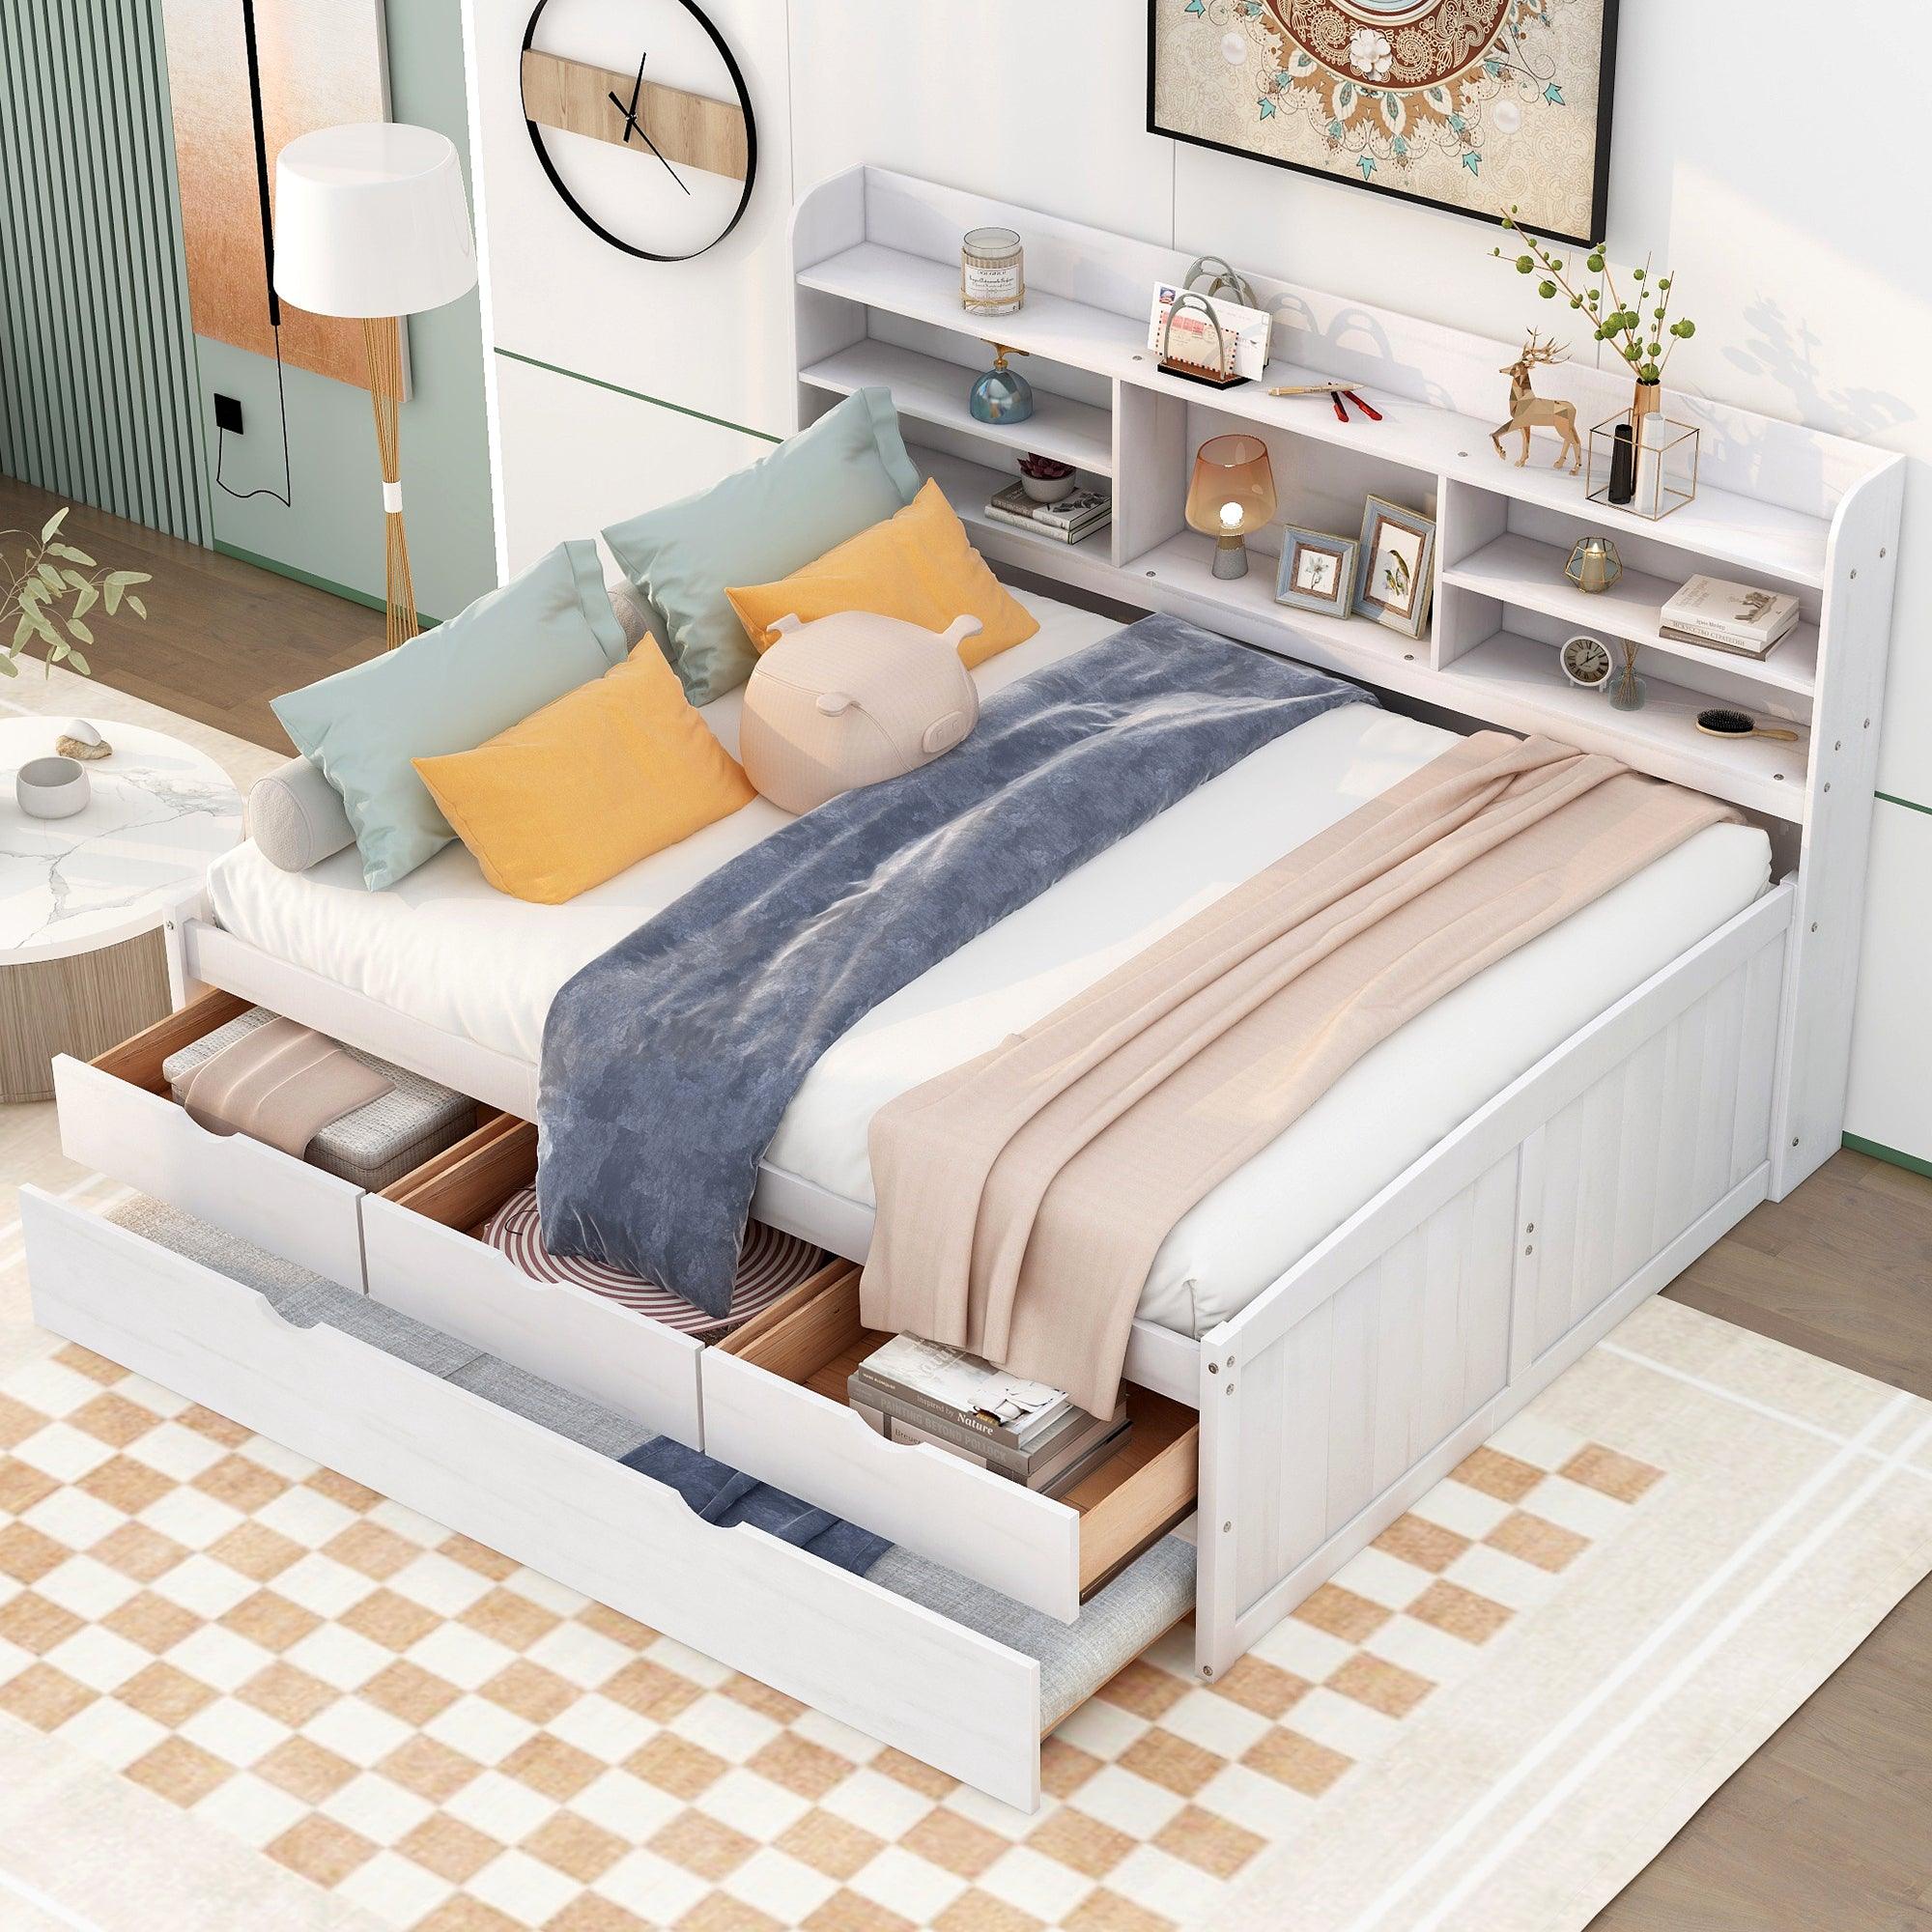 ???? Full Size Wooden Captain Bed With Built-in Bookshelves, Three Storage Drawers and Trundle, White Wash